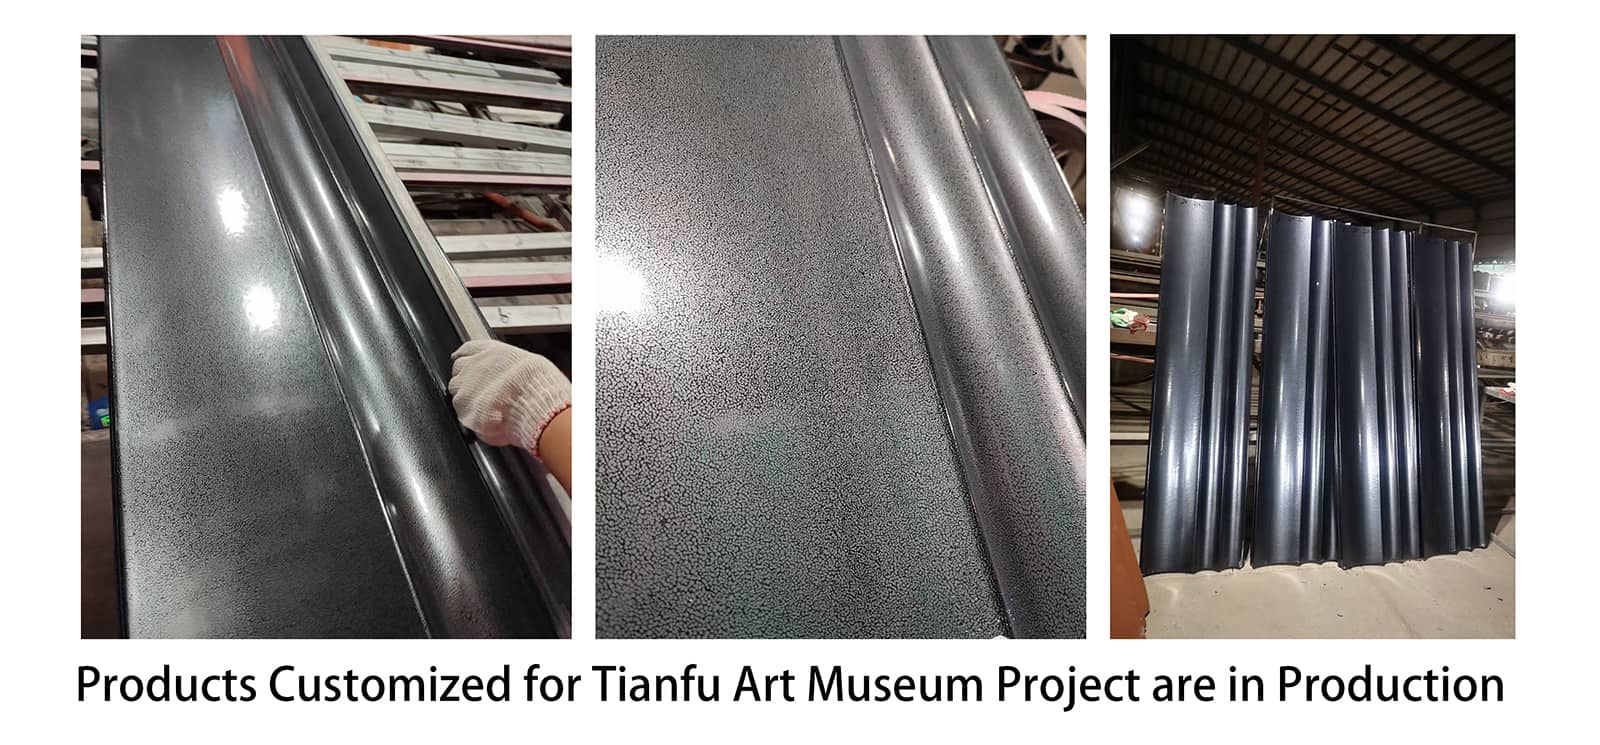 Customized Products of Tianfu Art Museum Project in LOPO Terracotta Plant.jpg